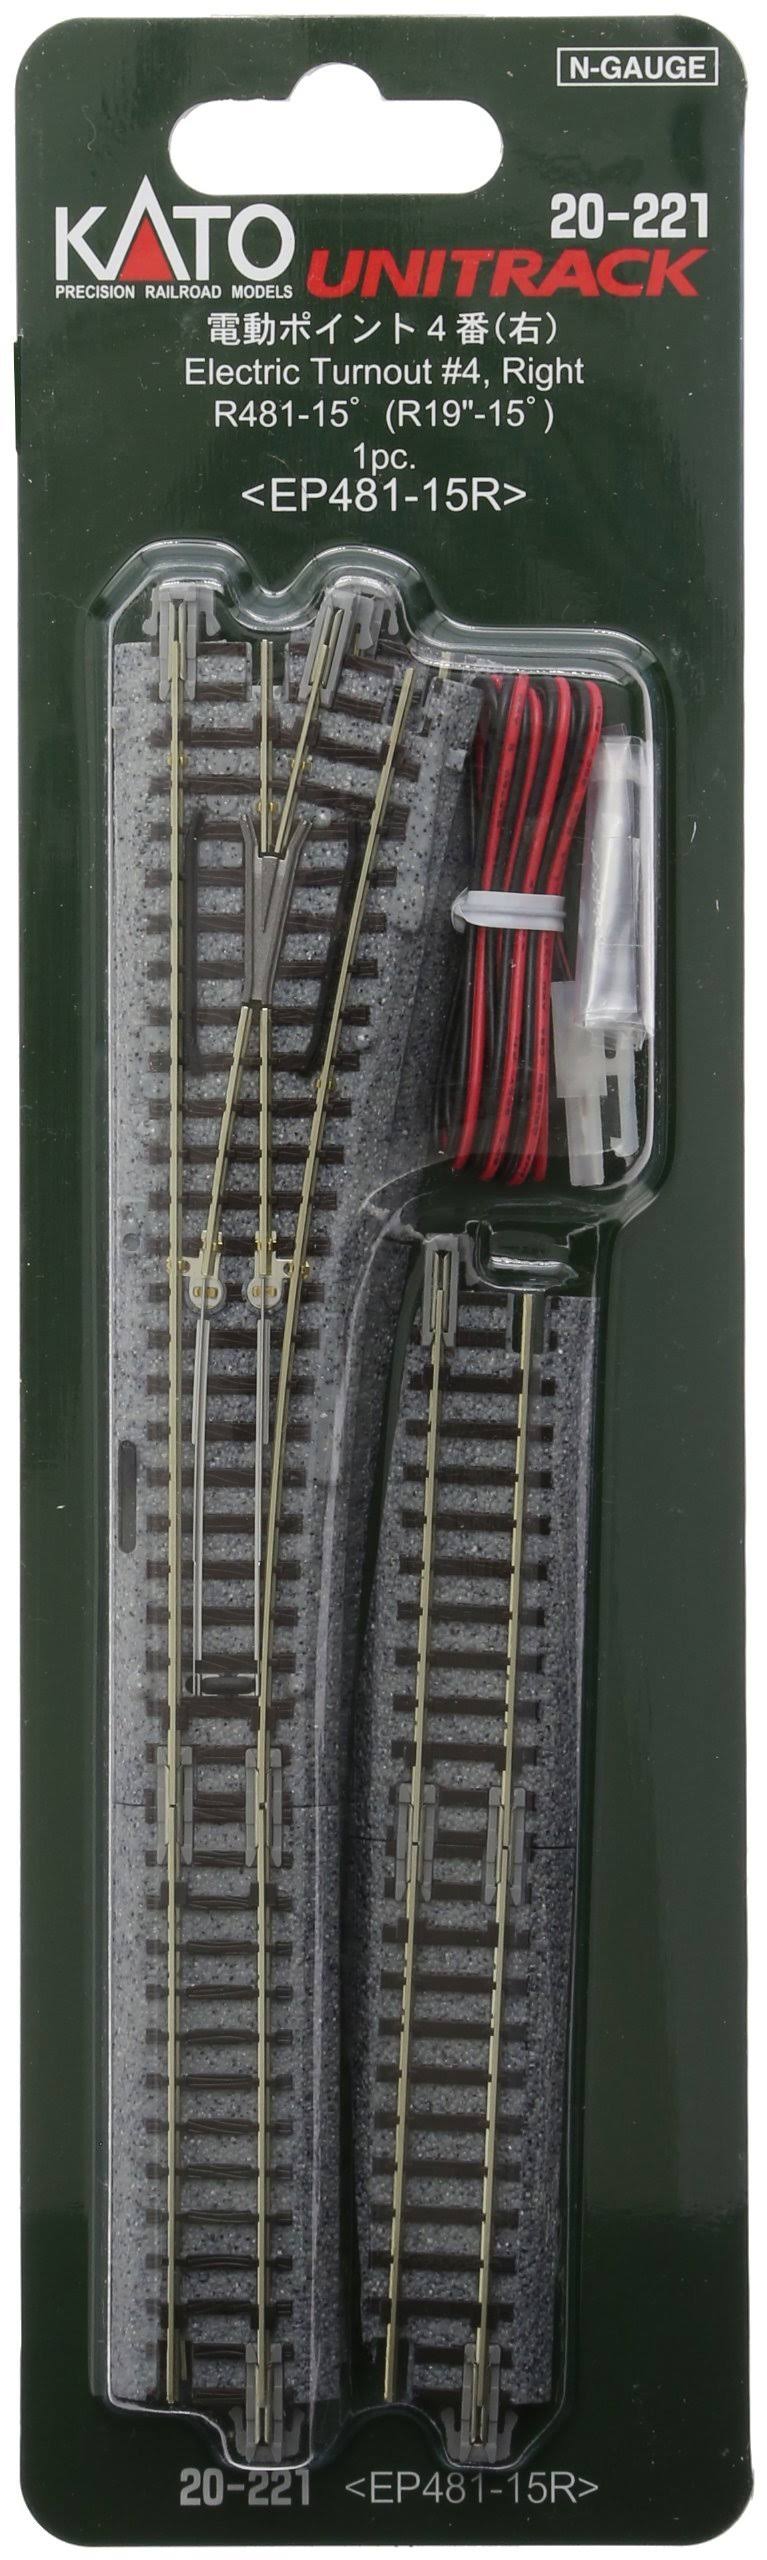 Kato 20-221 no.4 Right Turnout Rail Train Toy - with 481mm, 15 Radius Curve